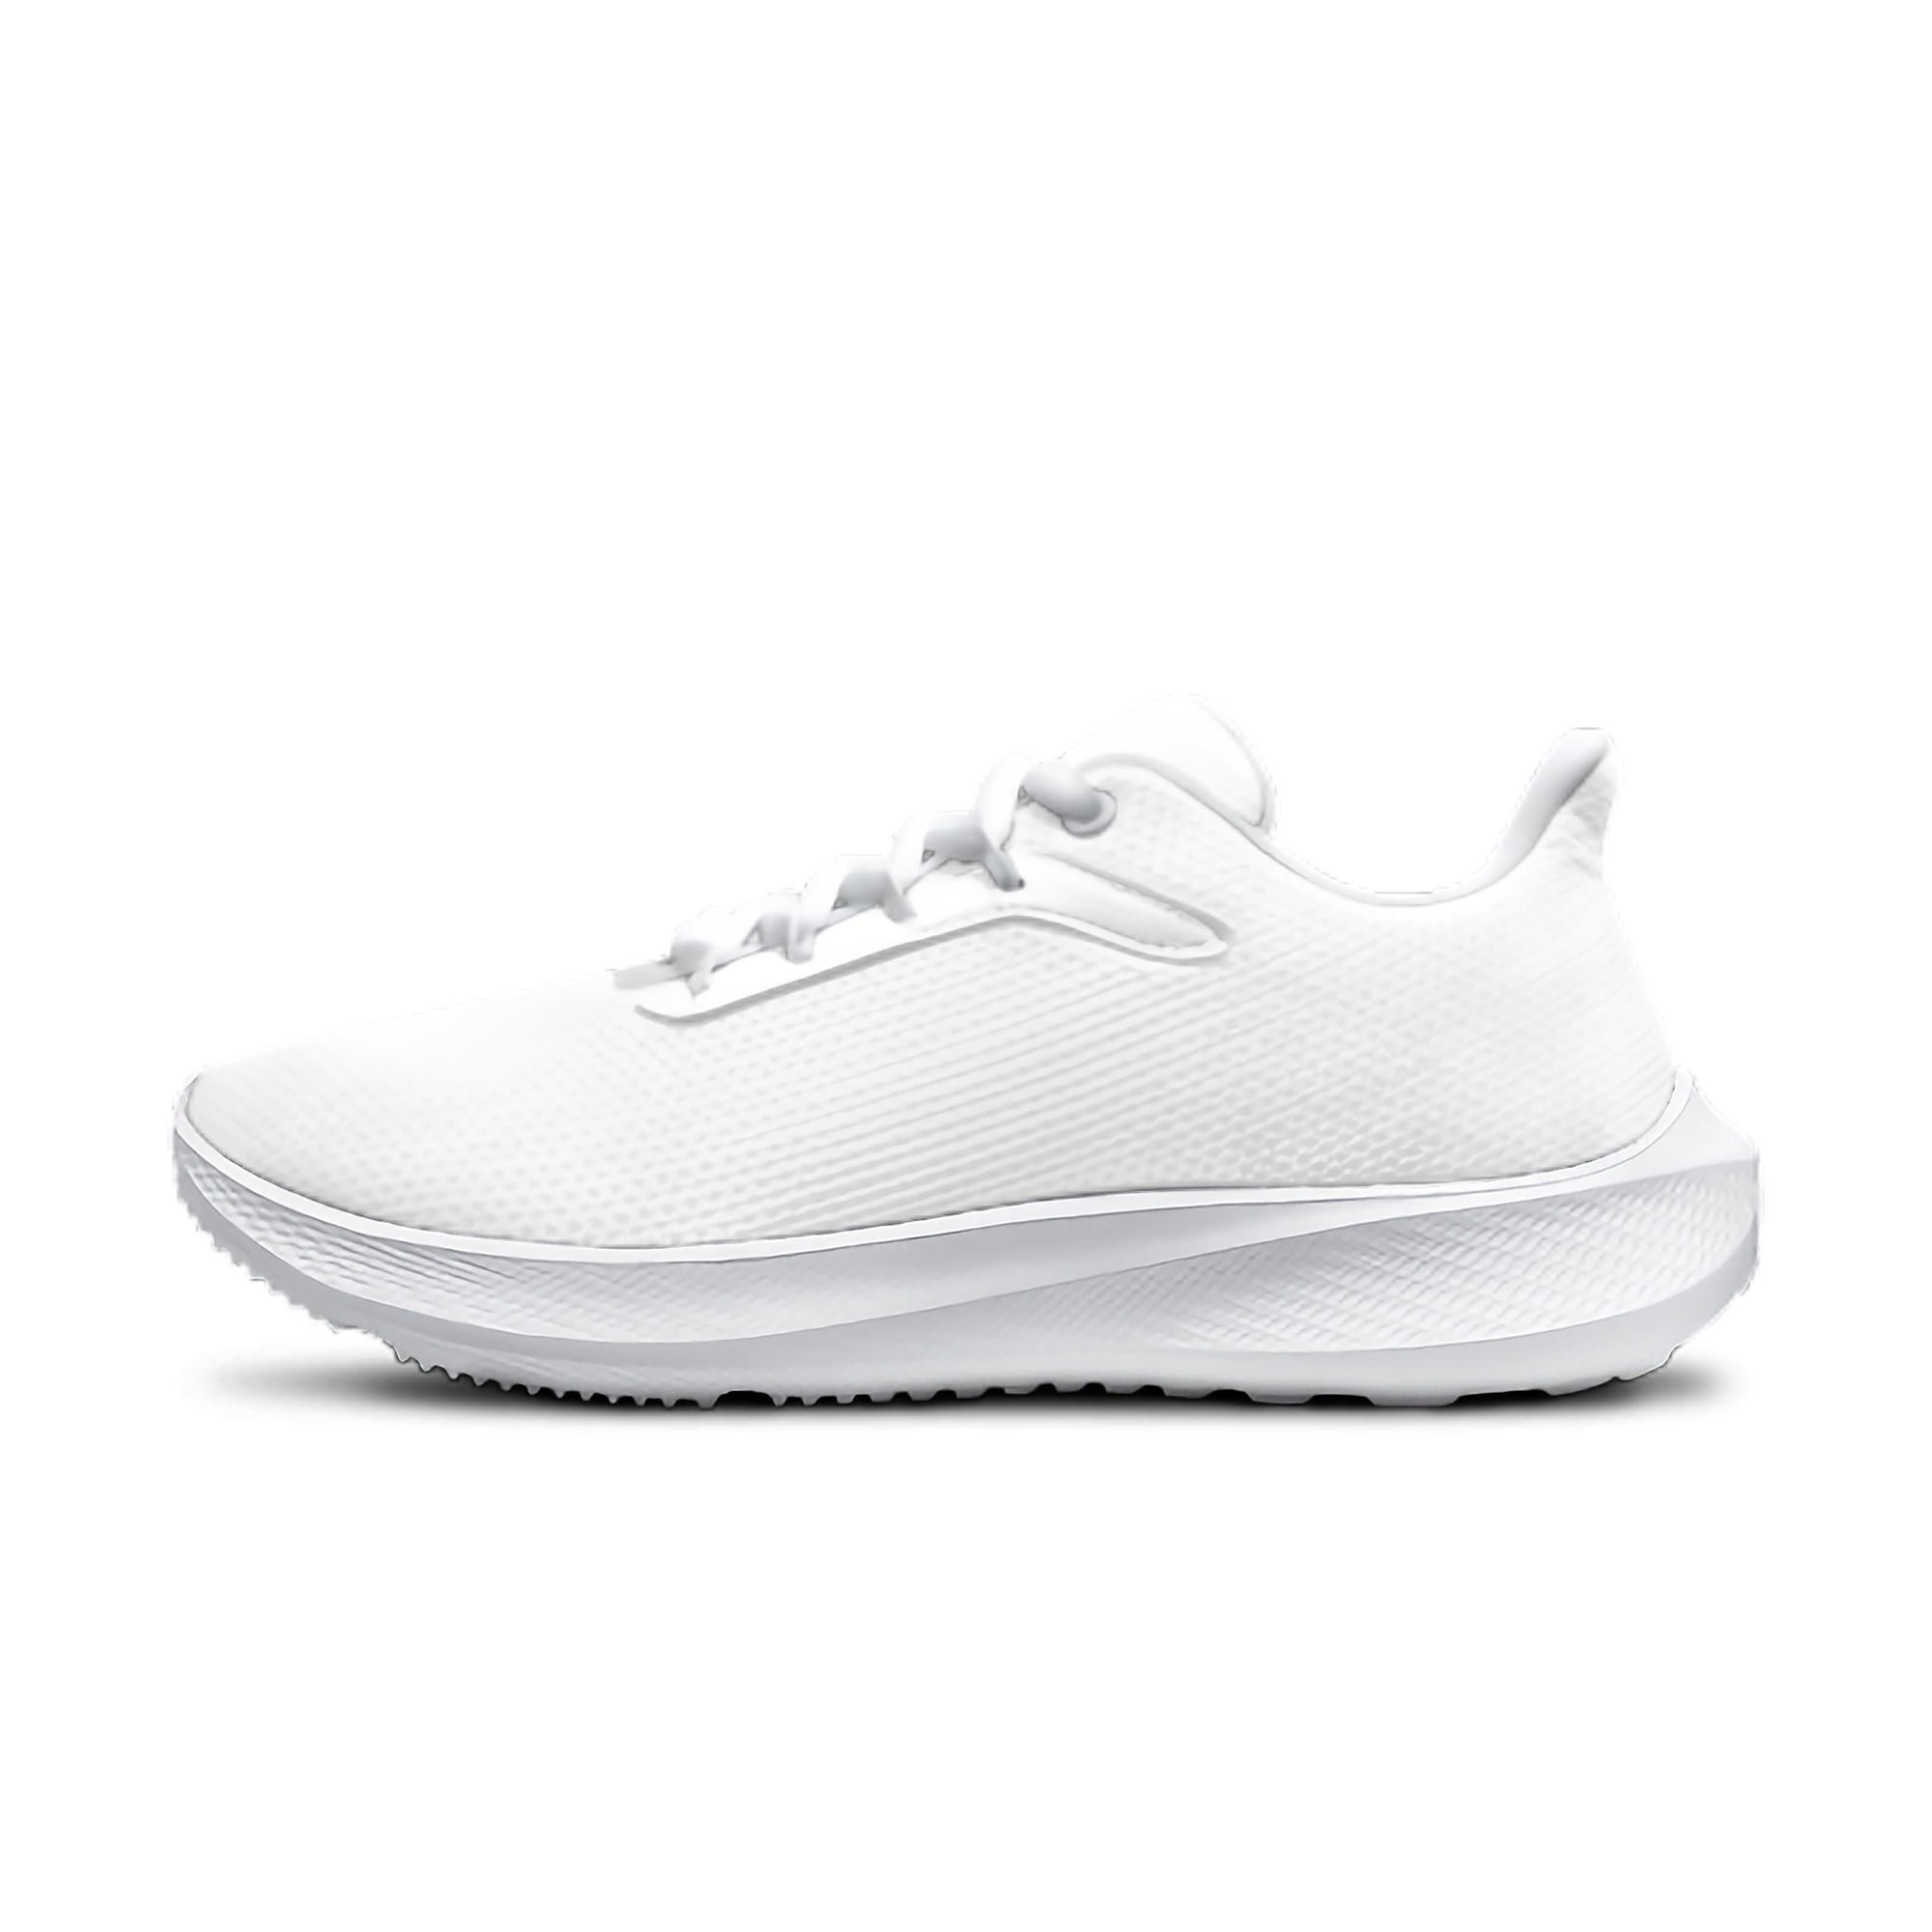 Customizable Lace Up Running Shoes | NonSlip Grip for Nurses and Other Service Industries